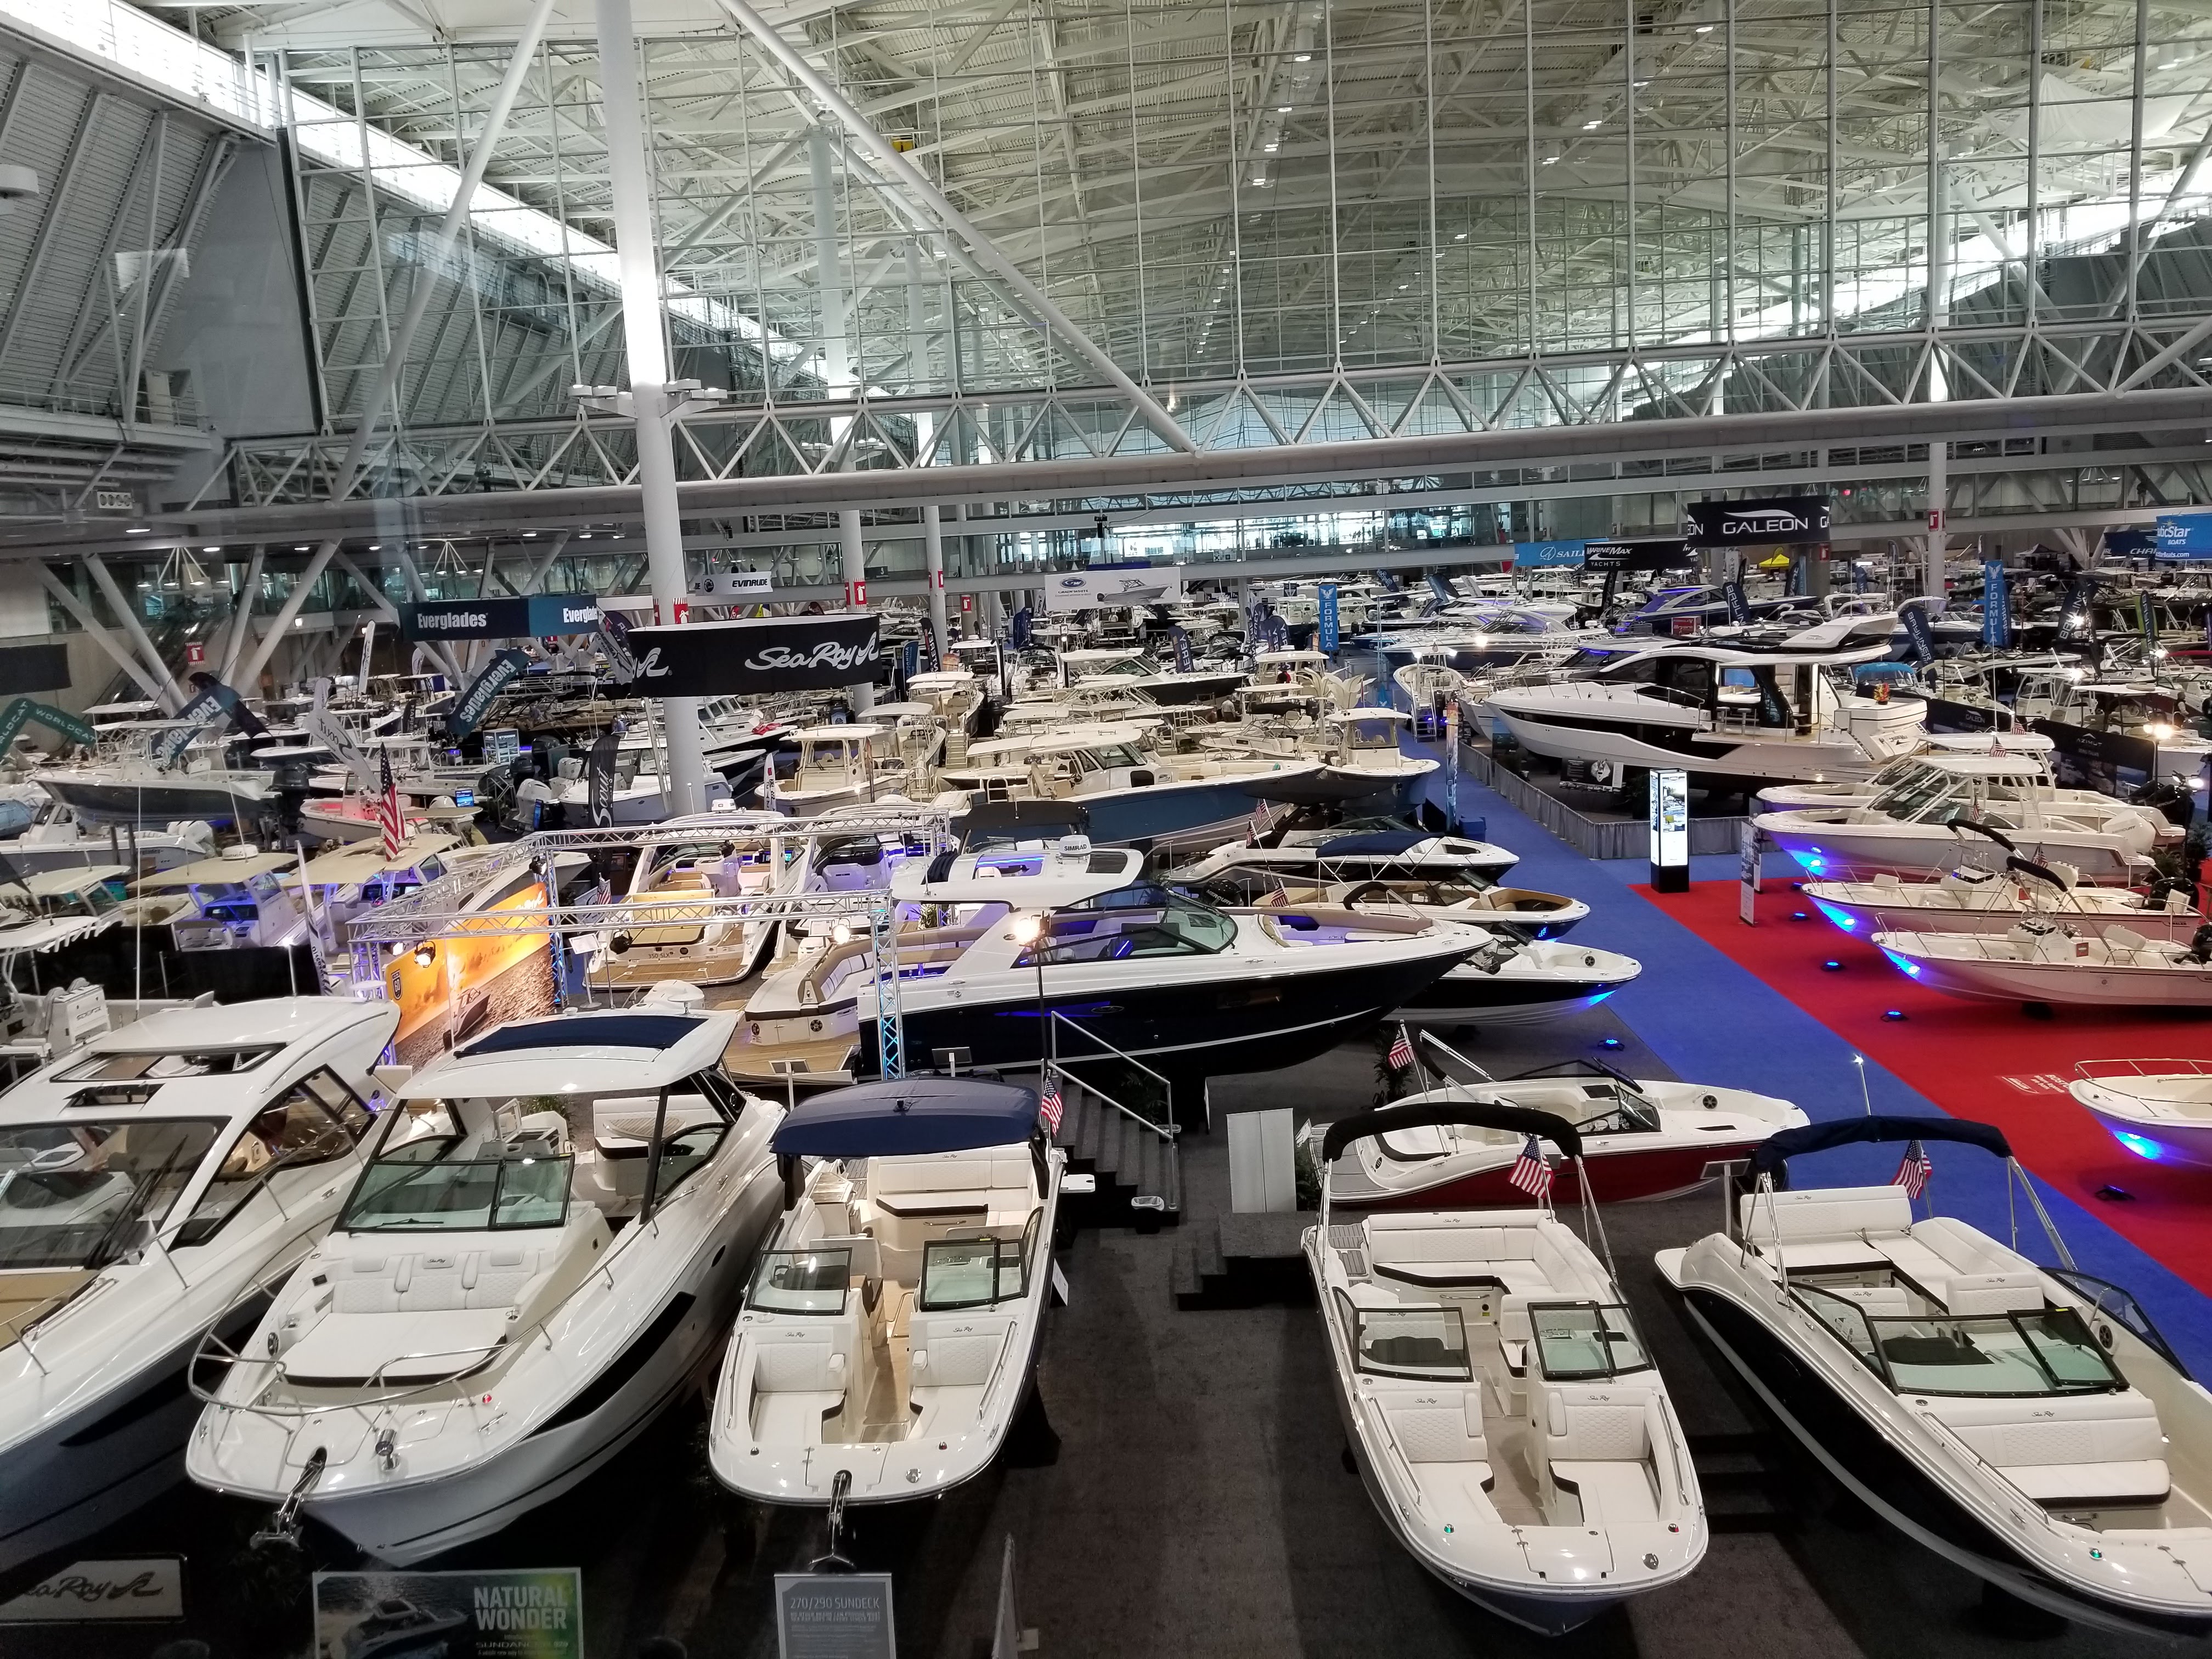 Boat Show Etiquette: The Do's and Don'ts of Attending a Boat Show